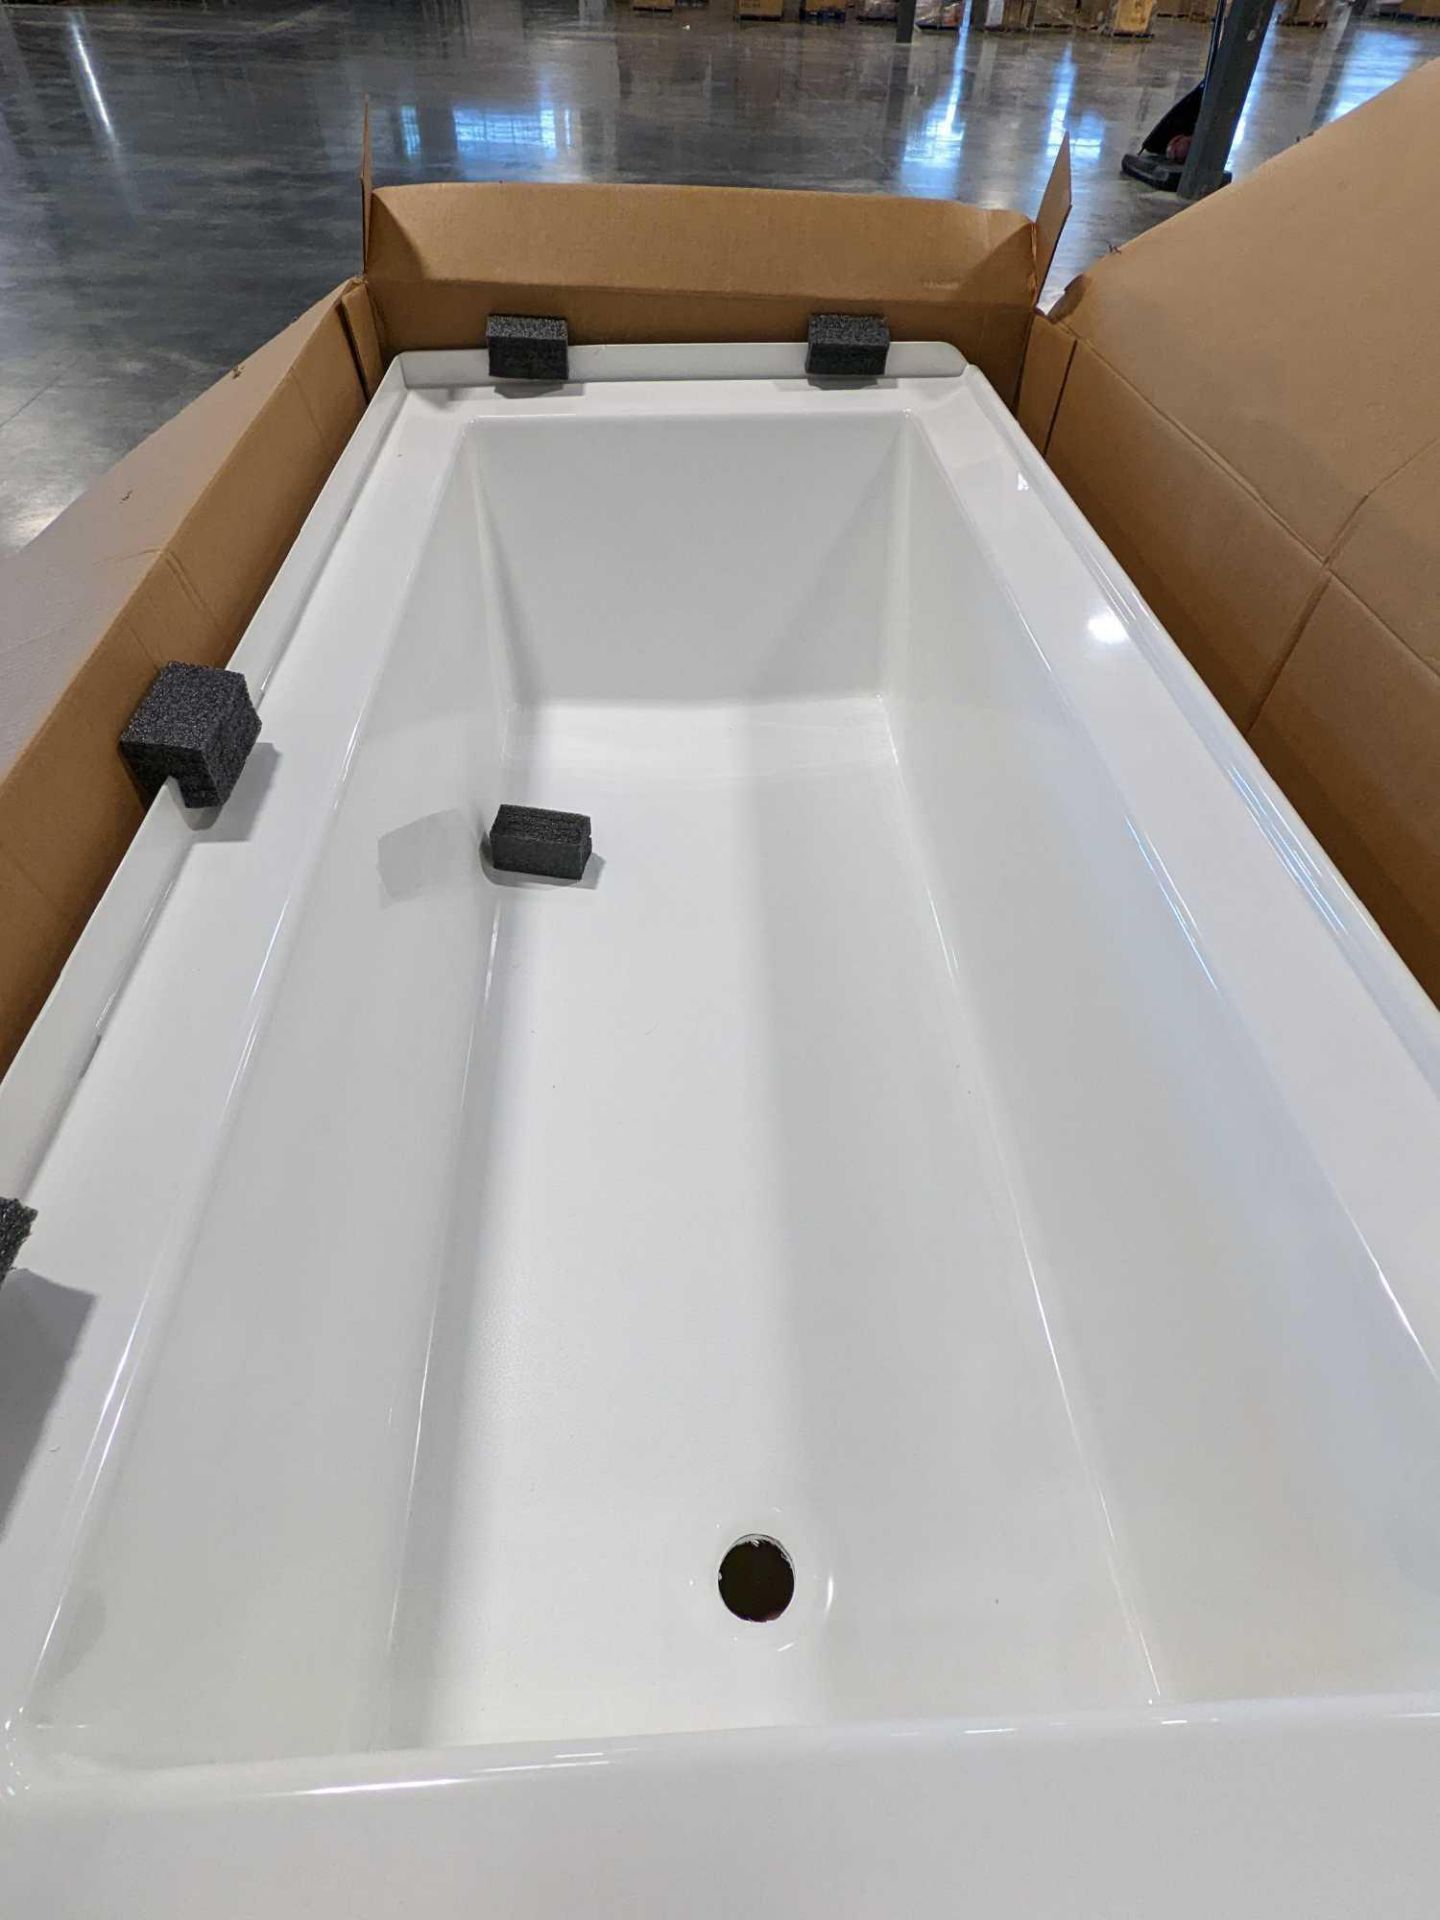 (2) composite 60x30x18 AFR TUBS - Image 2 of 8